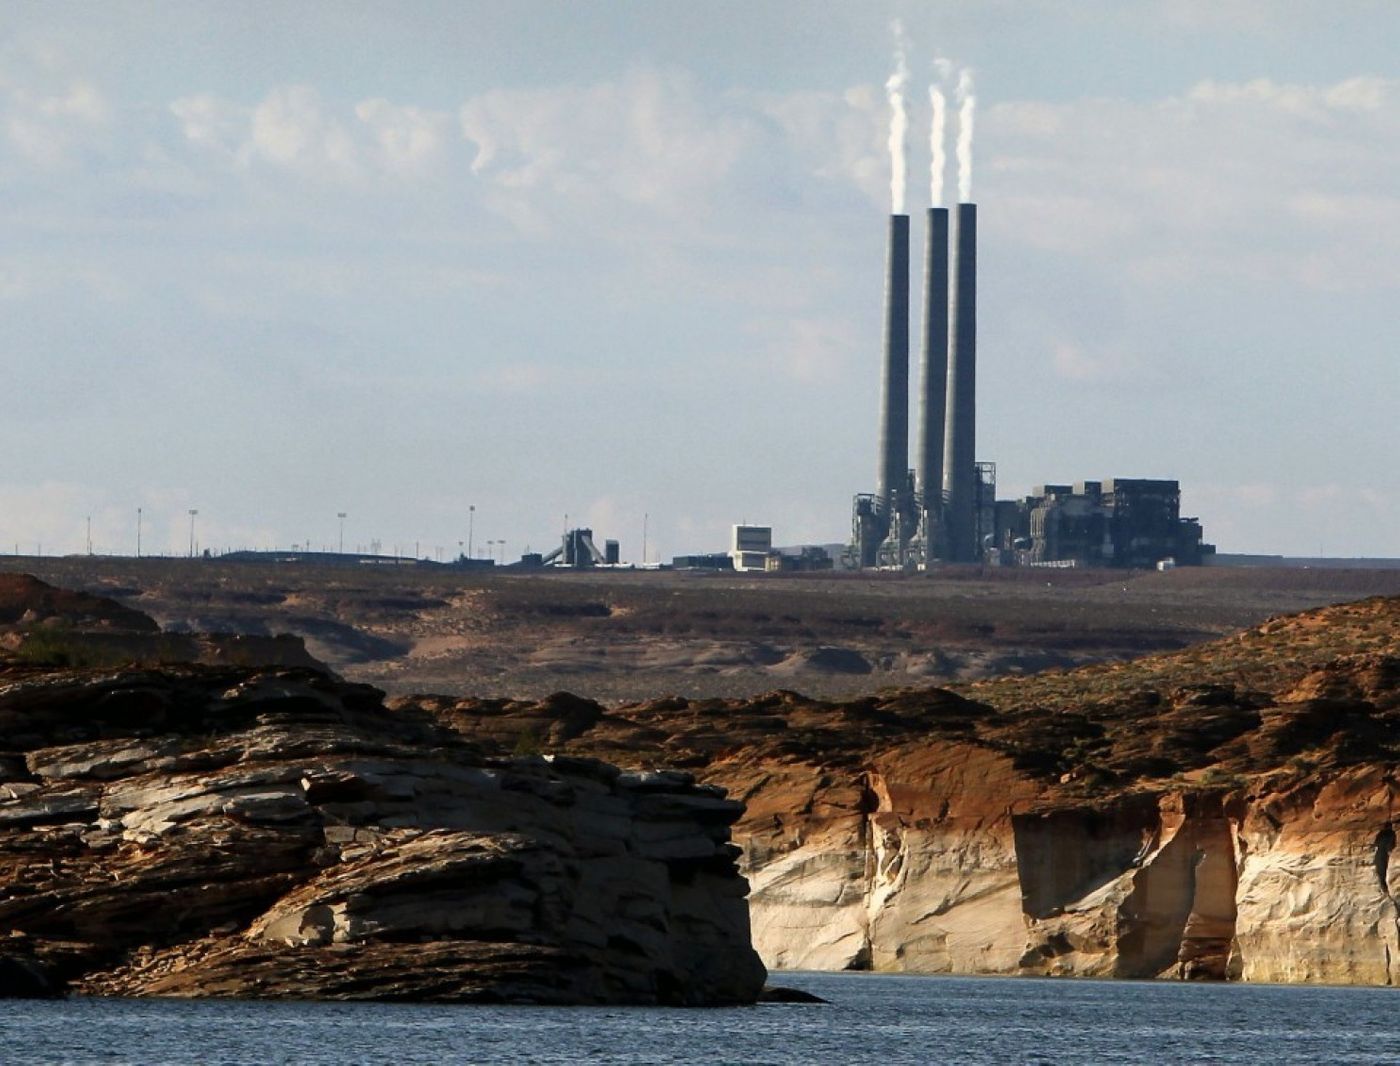 The main plant facility at the Navajo Generating Station, as seen from Lake Powell. Photo: Ross D. Franklin/AP